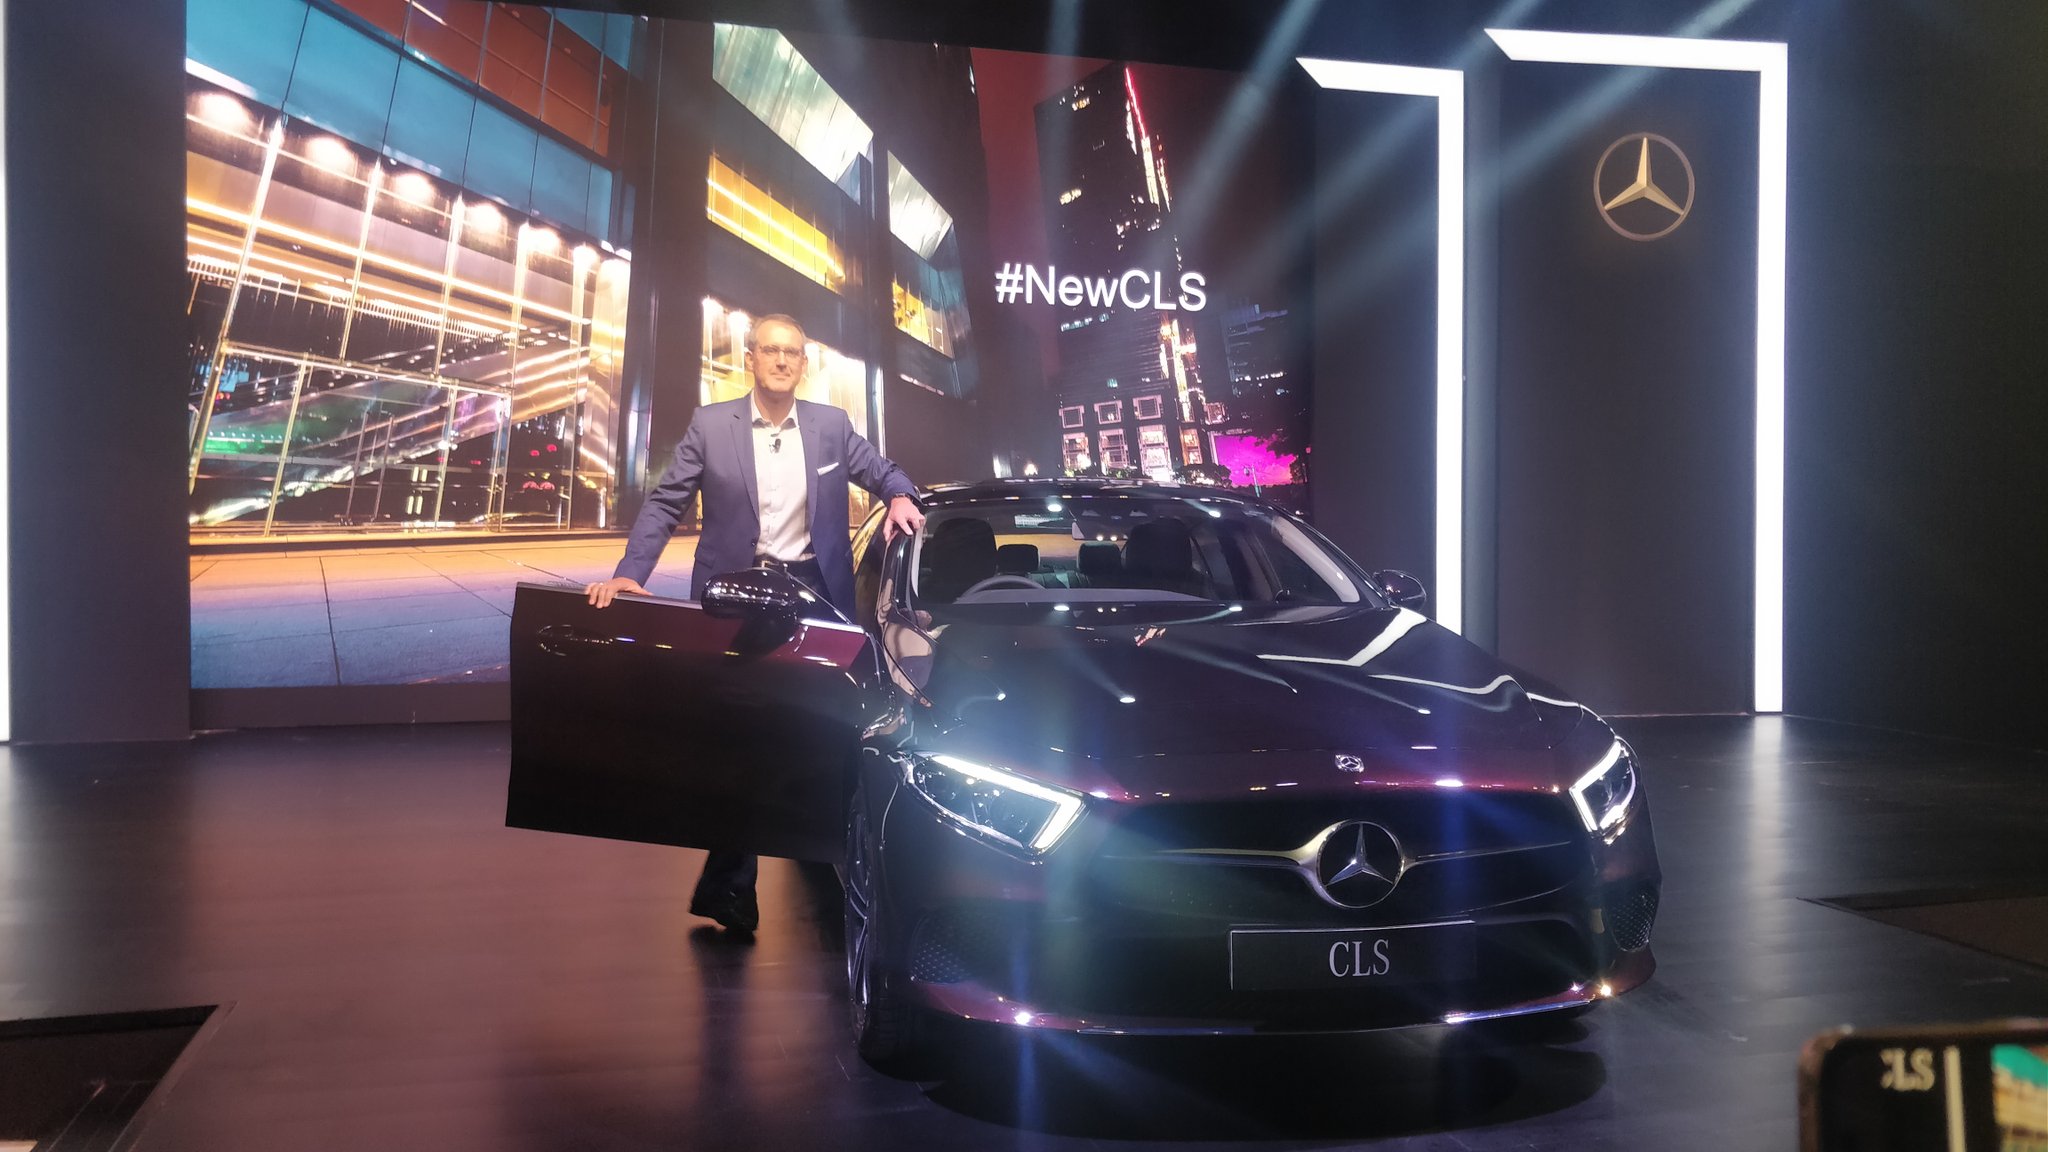 <p>Mercedes-Benz India has just launched the&nbsp;New CLS in India at Rs 84.70 lakh (ex-showroom). Here are all the details: h<a href="http://overdrive.in/news-cars-auto/2019-mercedes-benz-cls-four-door-coupe-launched-in-india-at-rs-x-xx-lakh/">ttp://overdrive.in/news-cars-auto/2019-mercedes-benz-cls-four-door-coupe-launched-in-india-at-rs-x-xx-lakh/</a></p>